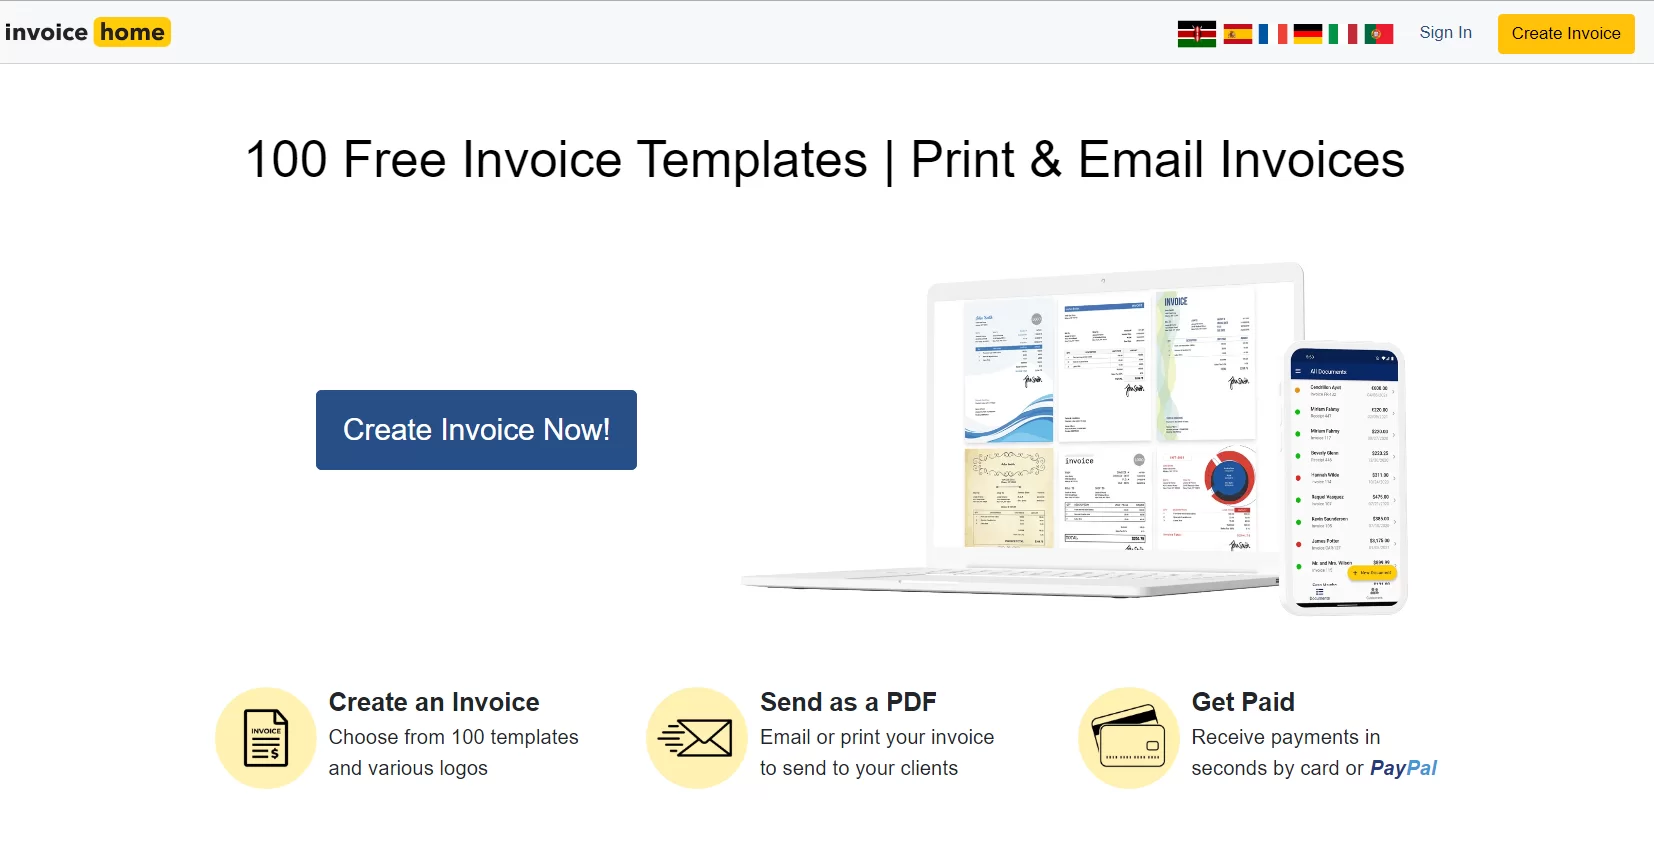 100 Free Invoice Home Templates | Print & Email Invoices